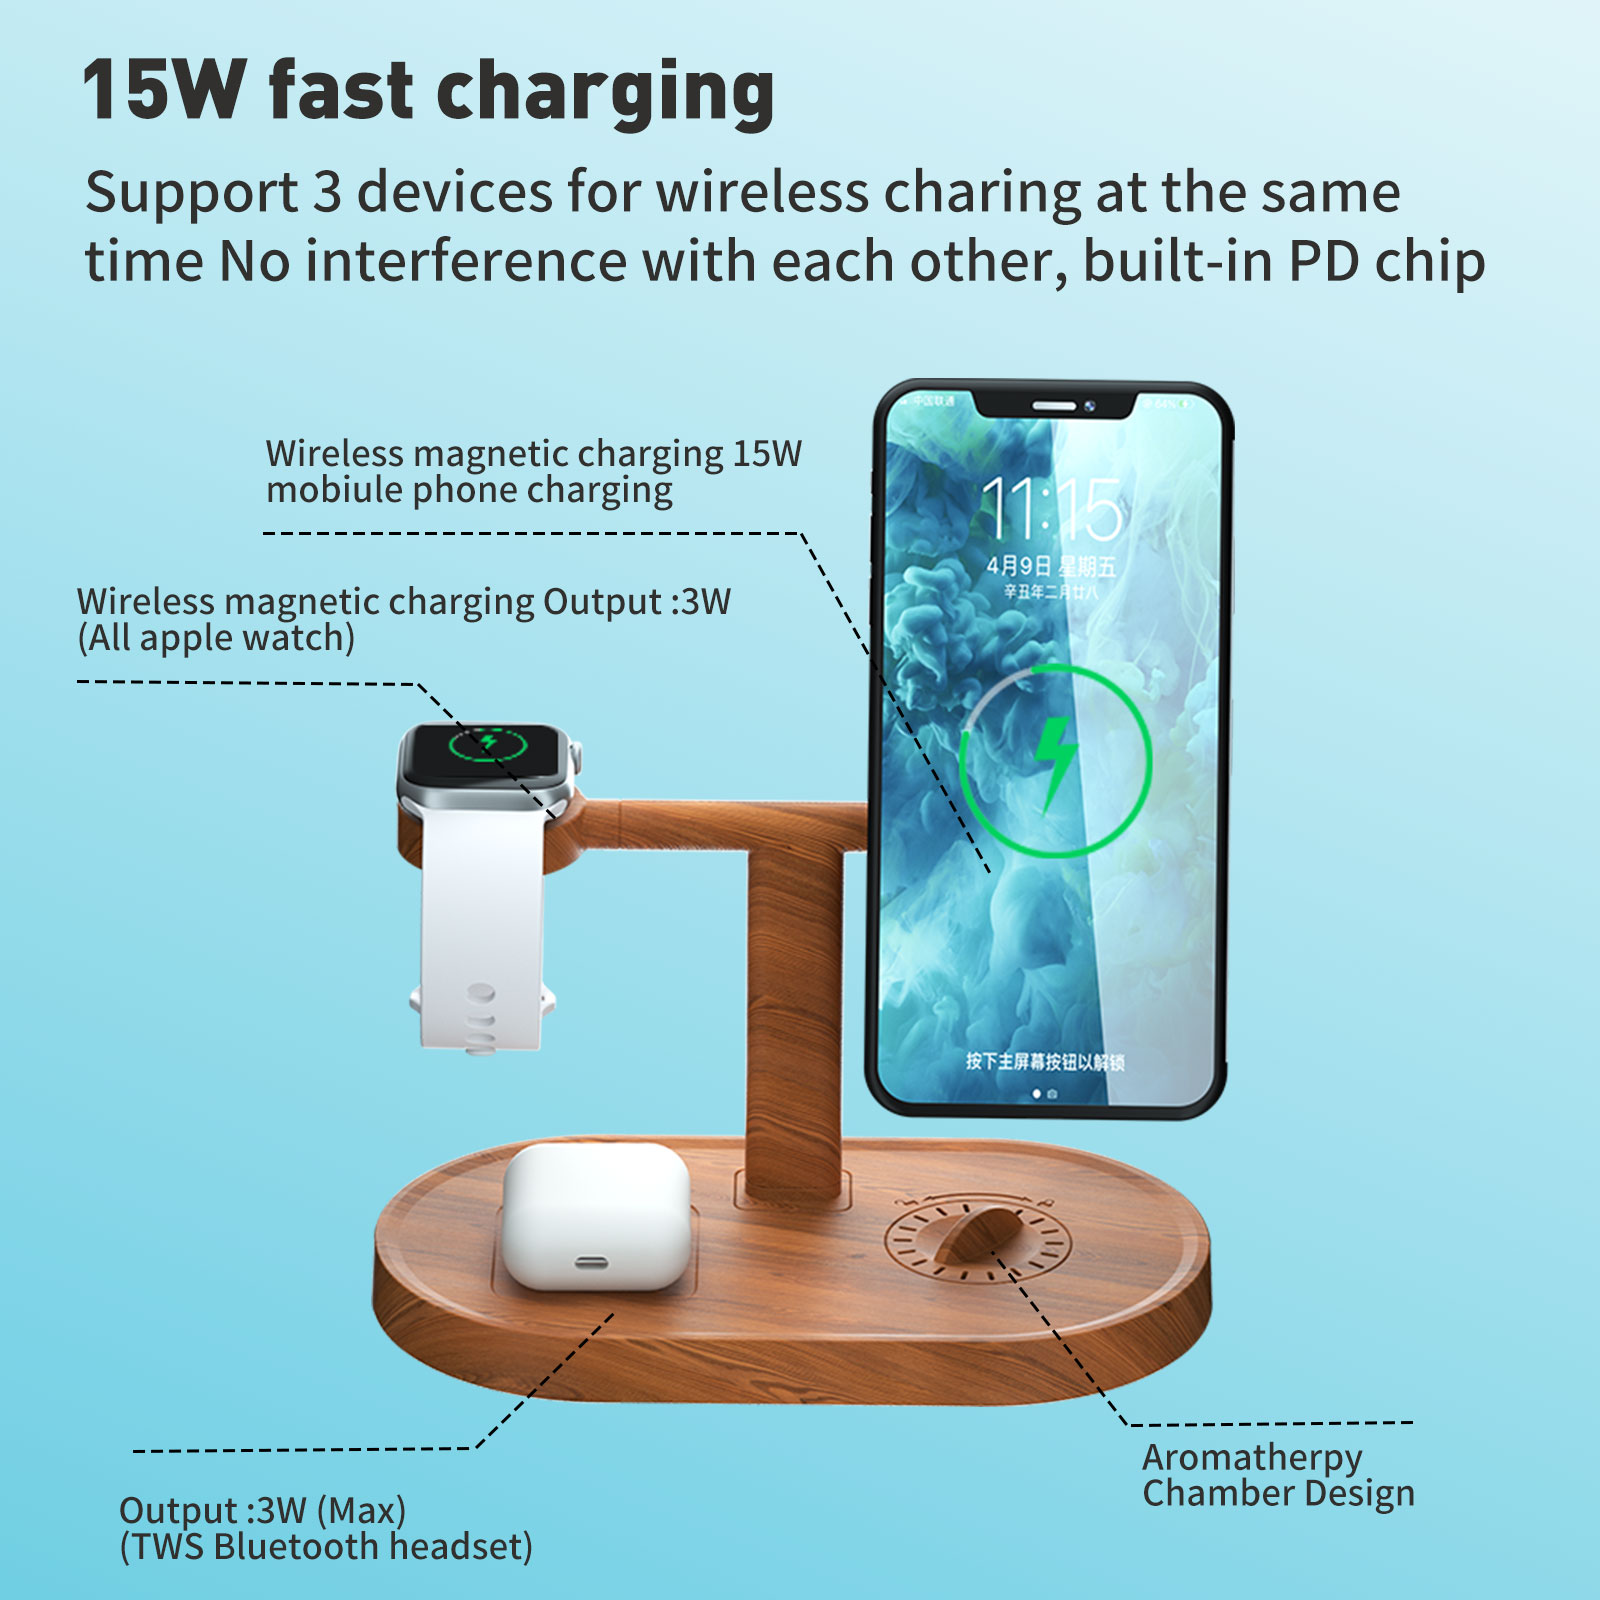 SMOIVE 3 in 1 Wireless Qi Fast Charger Dock Stand for iPhone 12 And Above &AirPods 2 and above & Apple Watch (Wood Color) - image 4 of 8